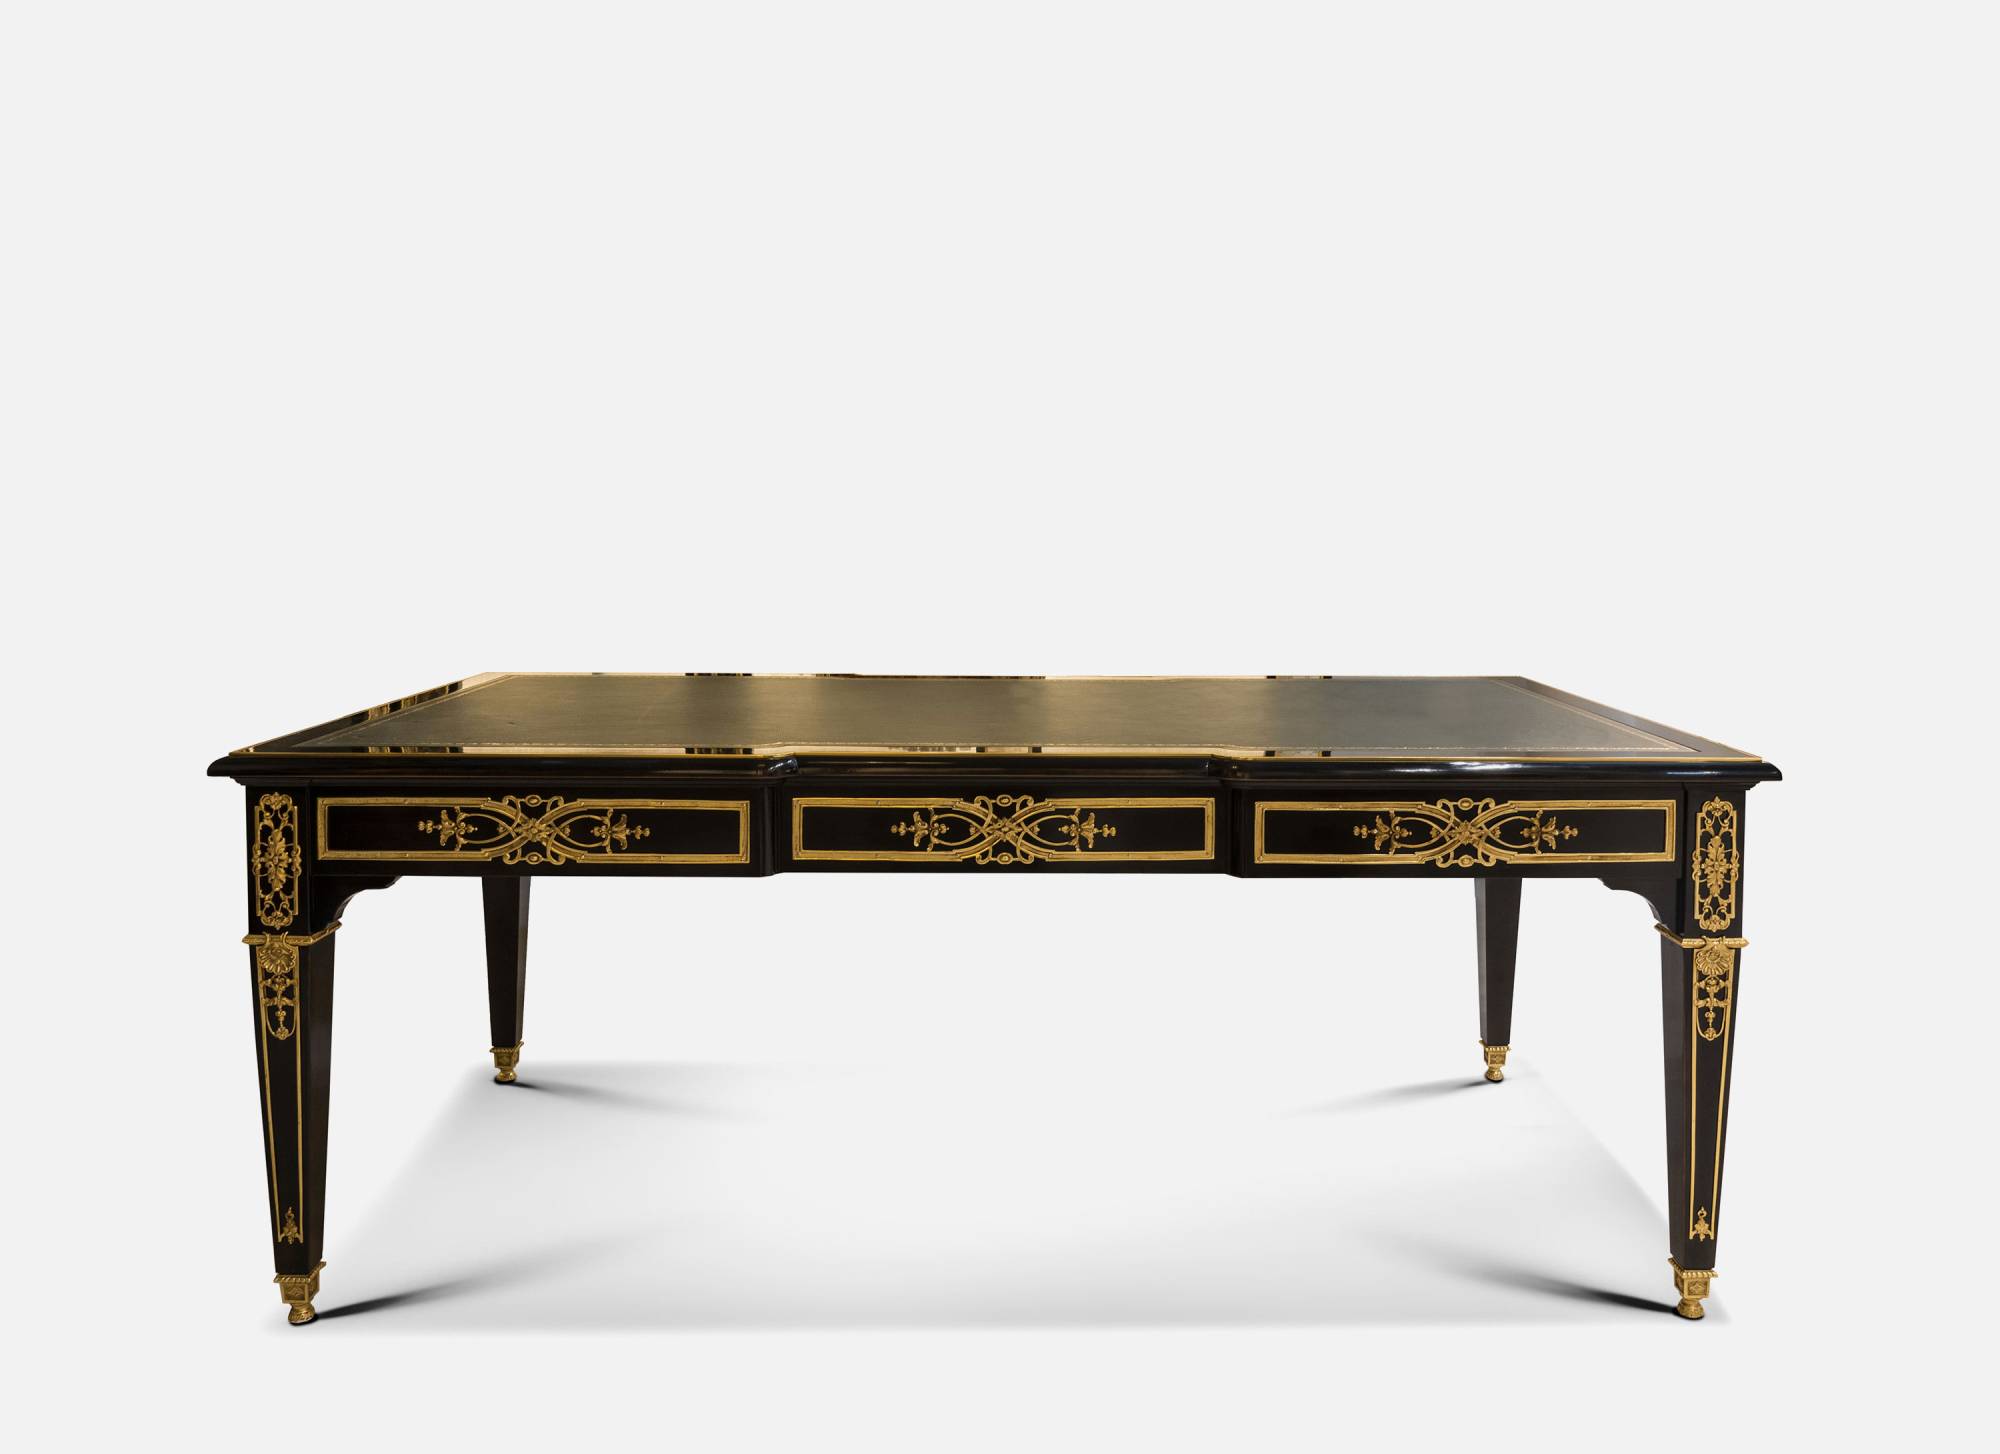 ART.1045-19 – The elegance of luxury classic Desks and writing desks made in Italy by C.G. Capelletti.